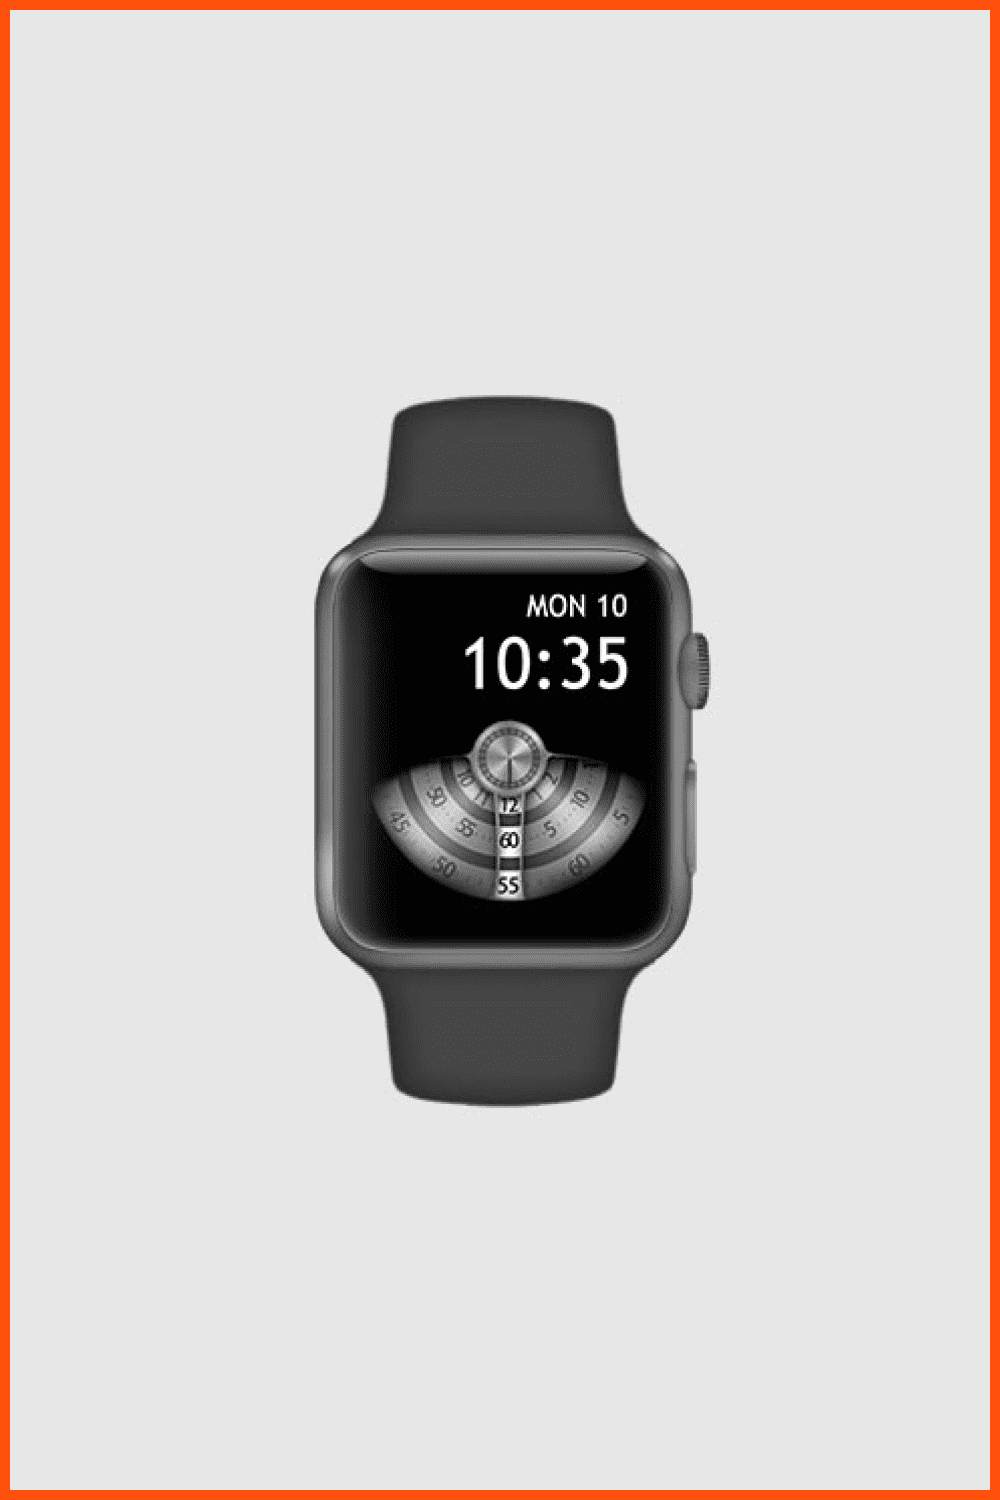 Apple watch with half round clock face.